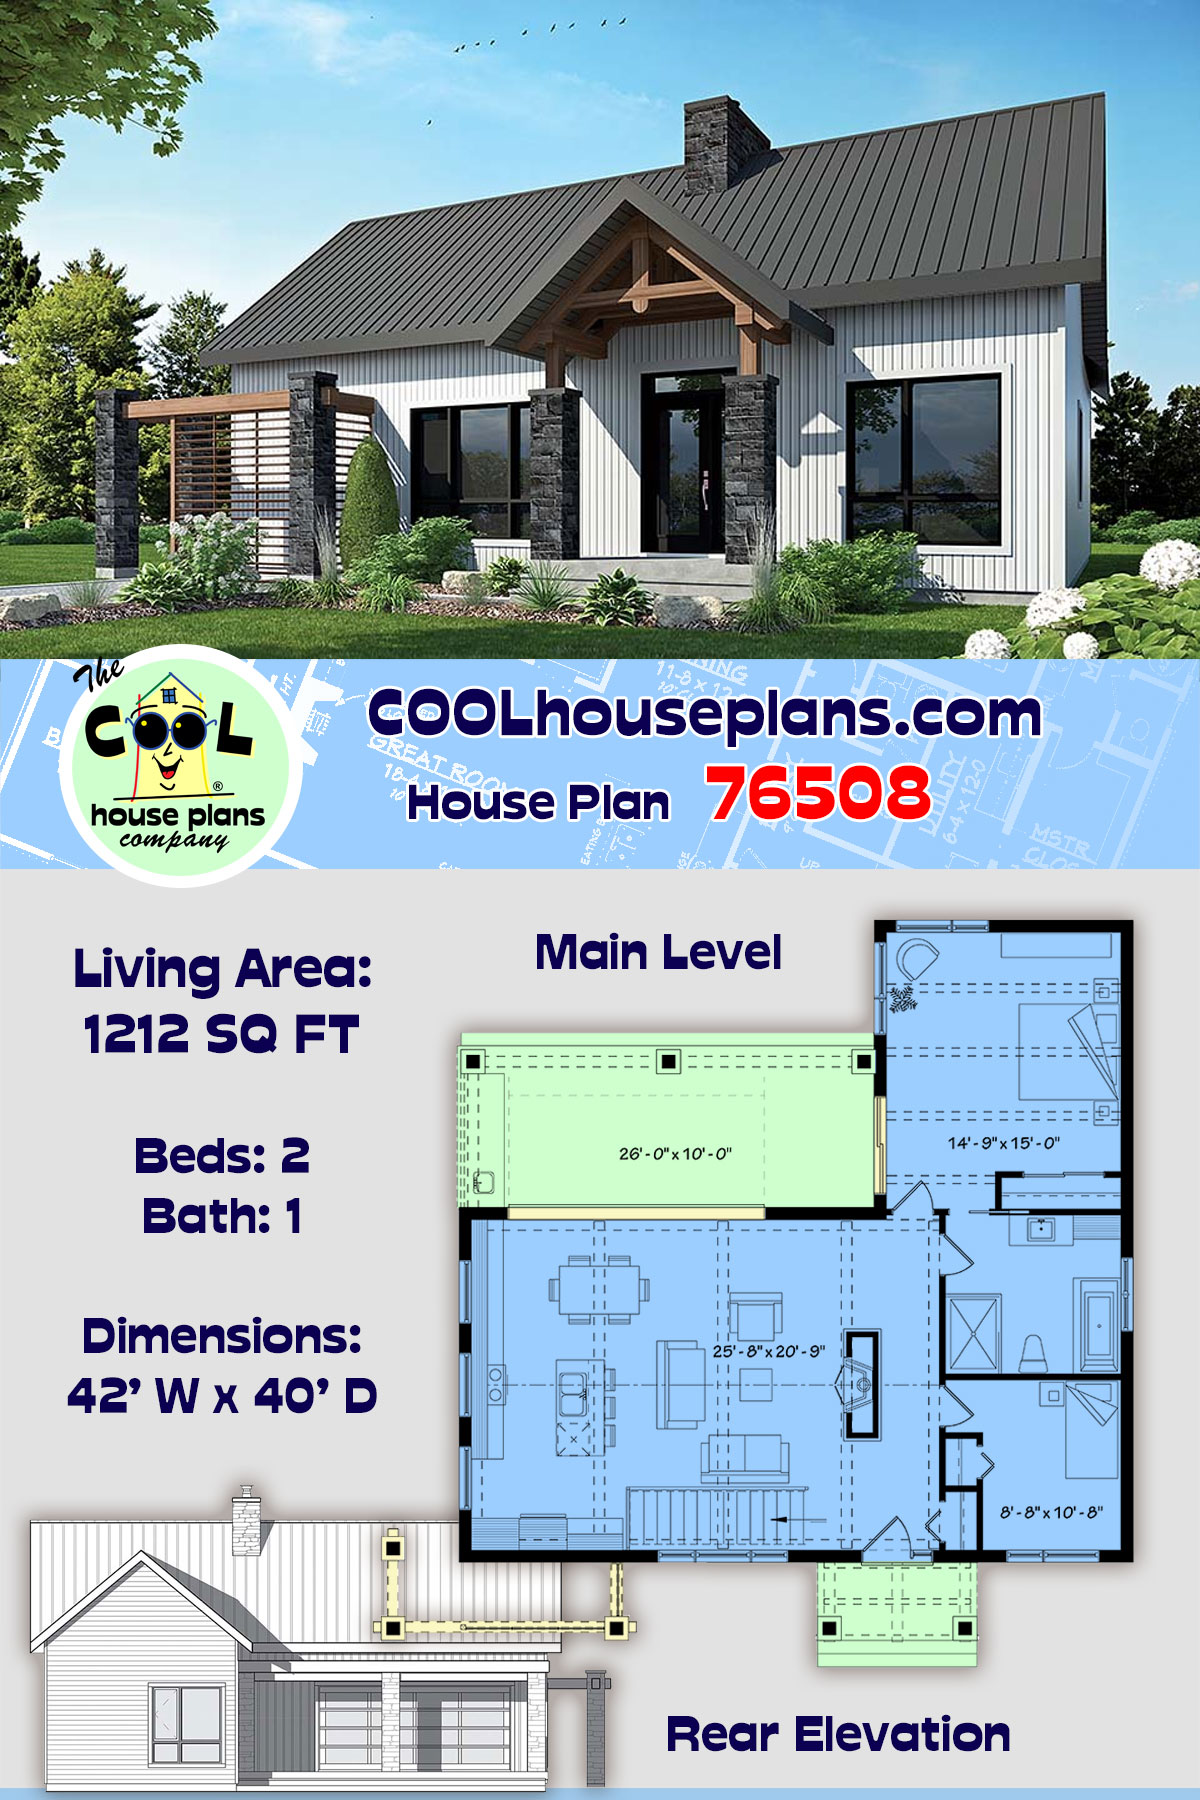 Cape Cod, Contemporary, Cottage, Country, Craftsman, Modern House Plan 76508 with 2 Beds, 1 Baths